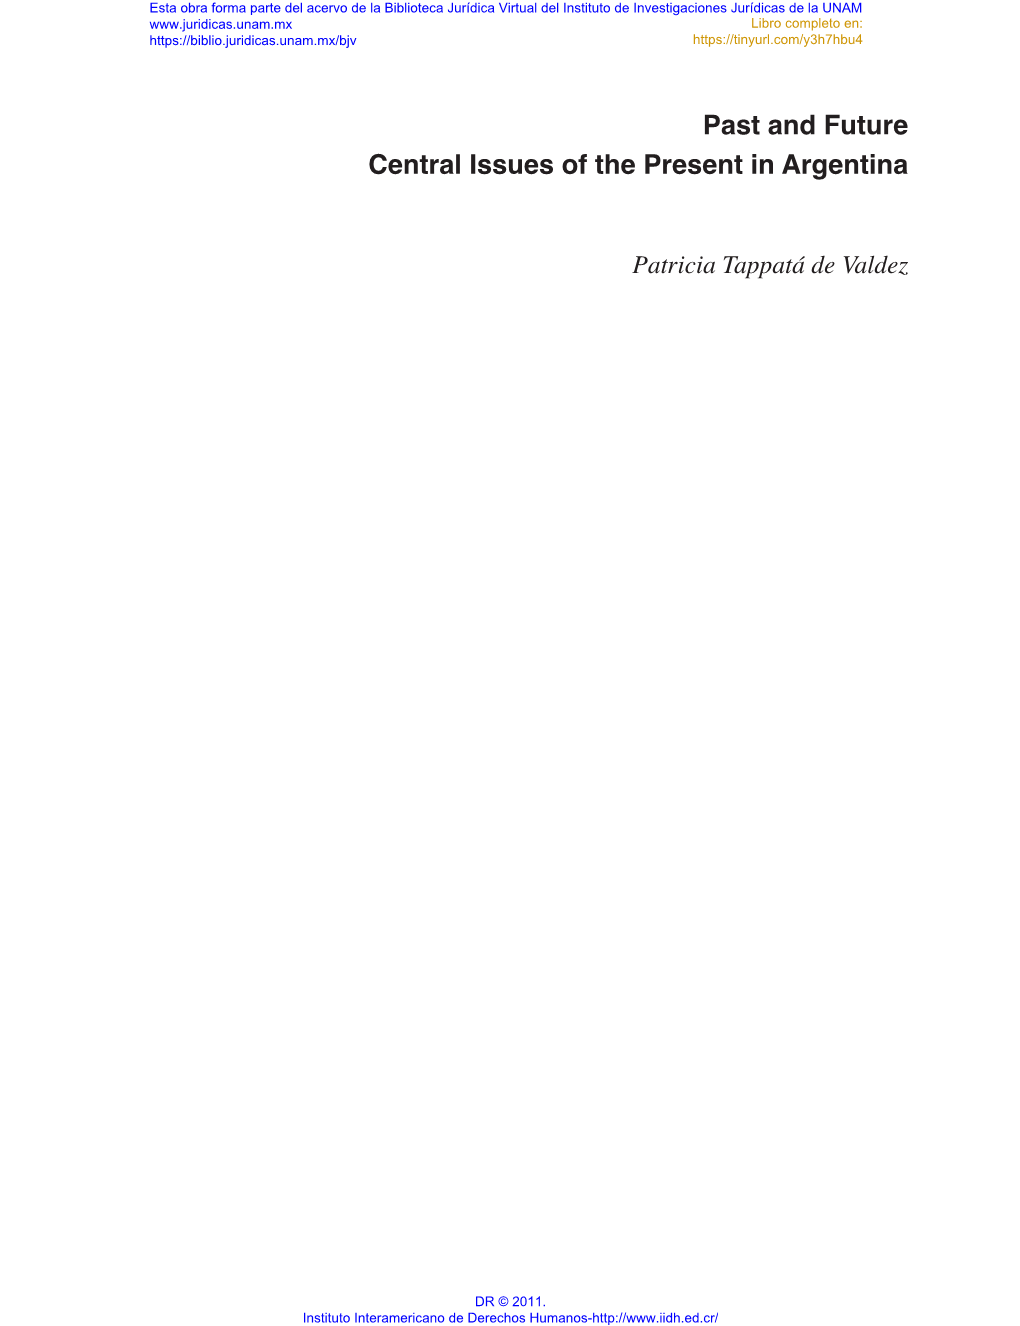 Past and Future Central Issues of the Present in Argentina